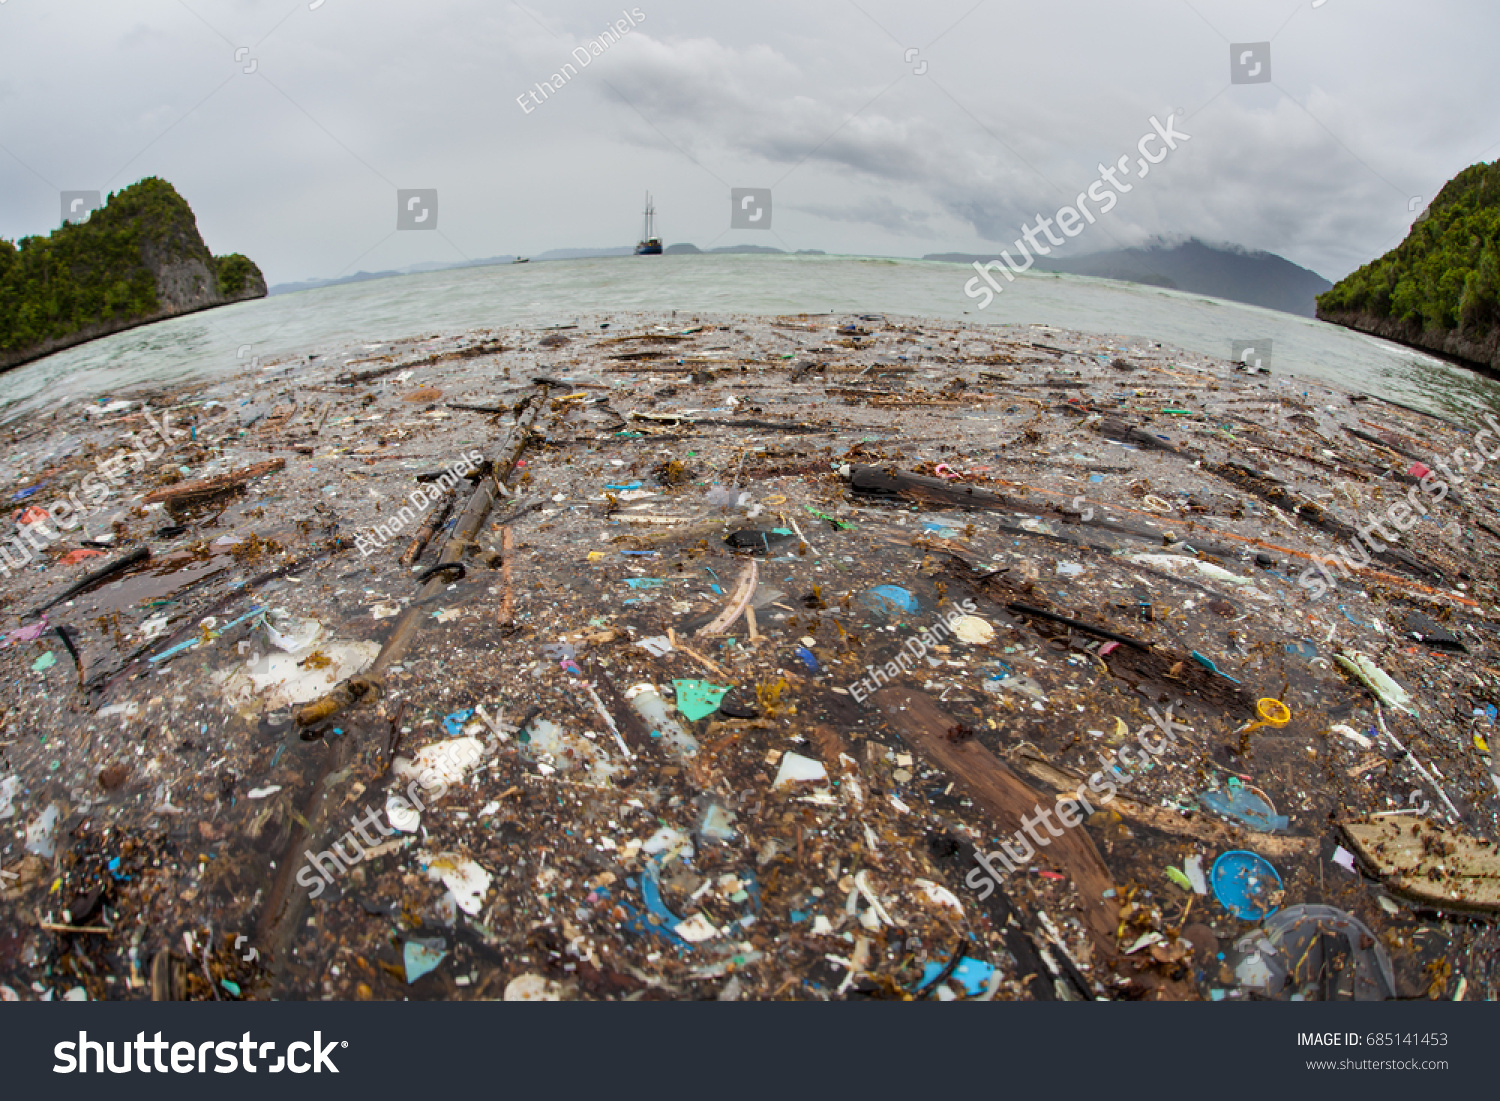 Discarded plastic has washed up near a remote island in Raja Ampat, Indonesia. Plastic is an ever-growing danger to marine ecosystems throughout the world. #685141453